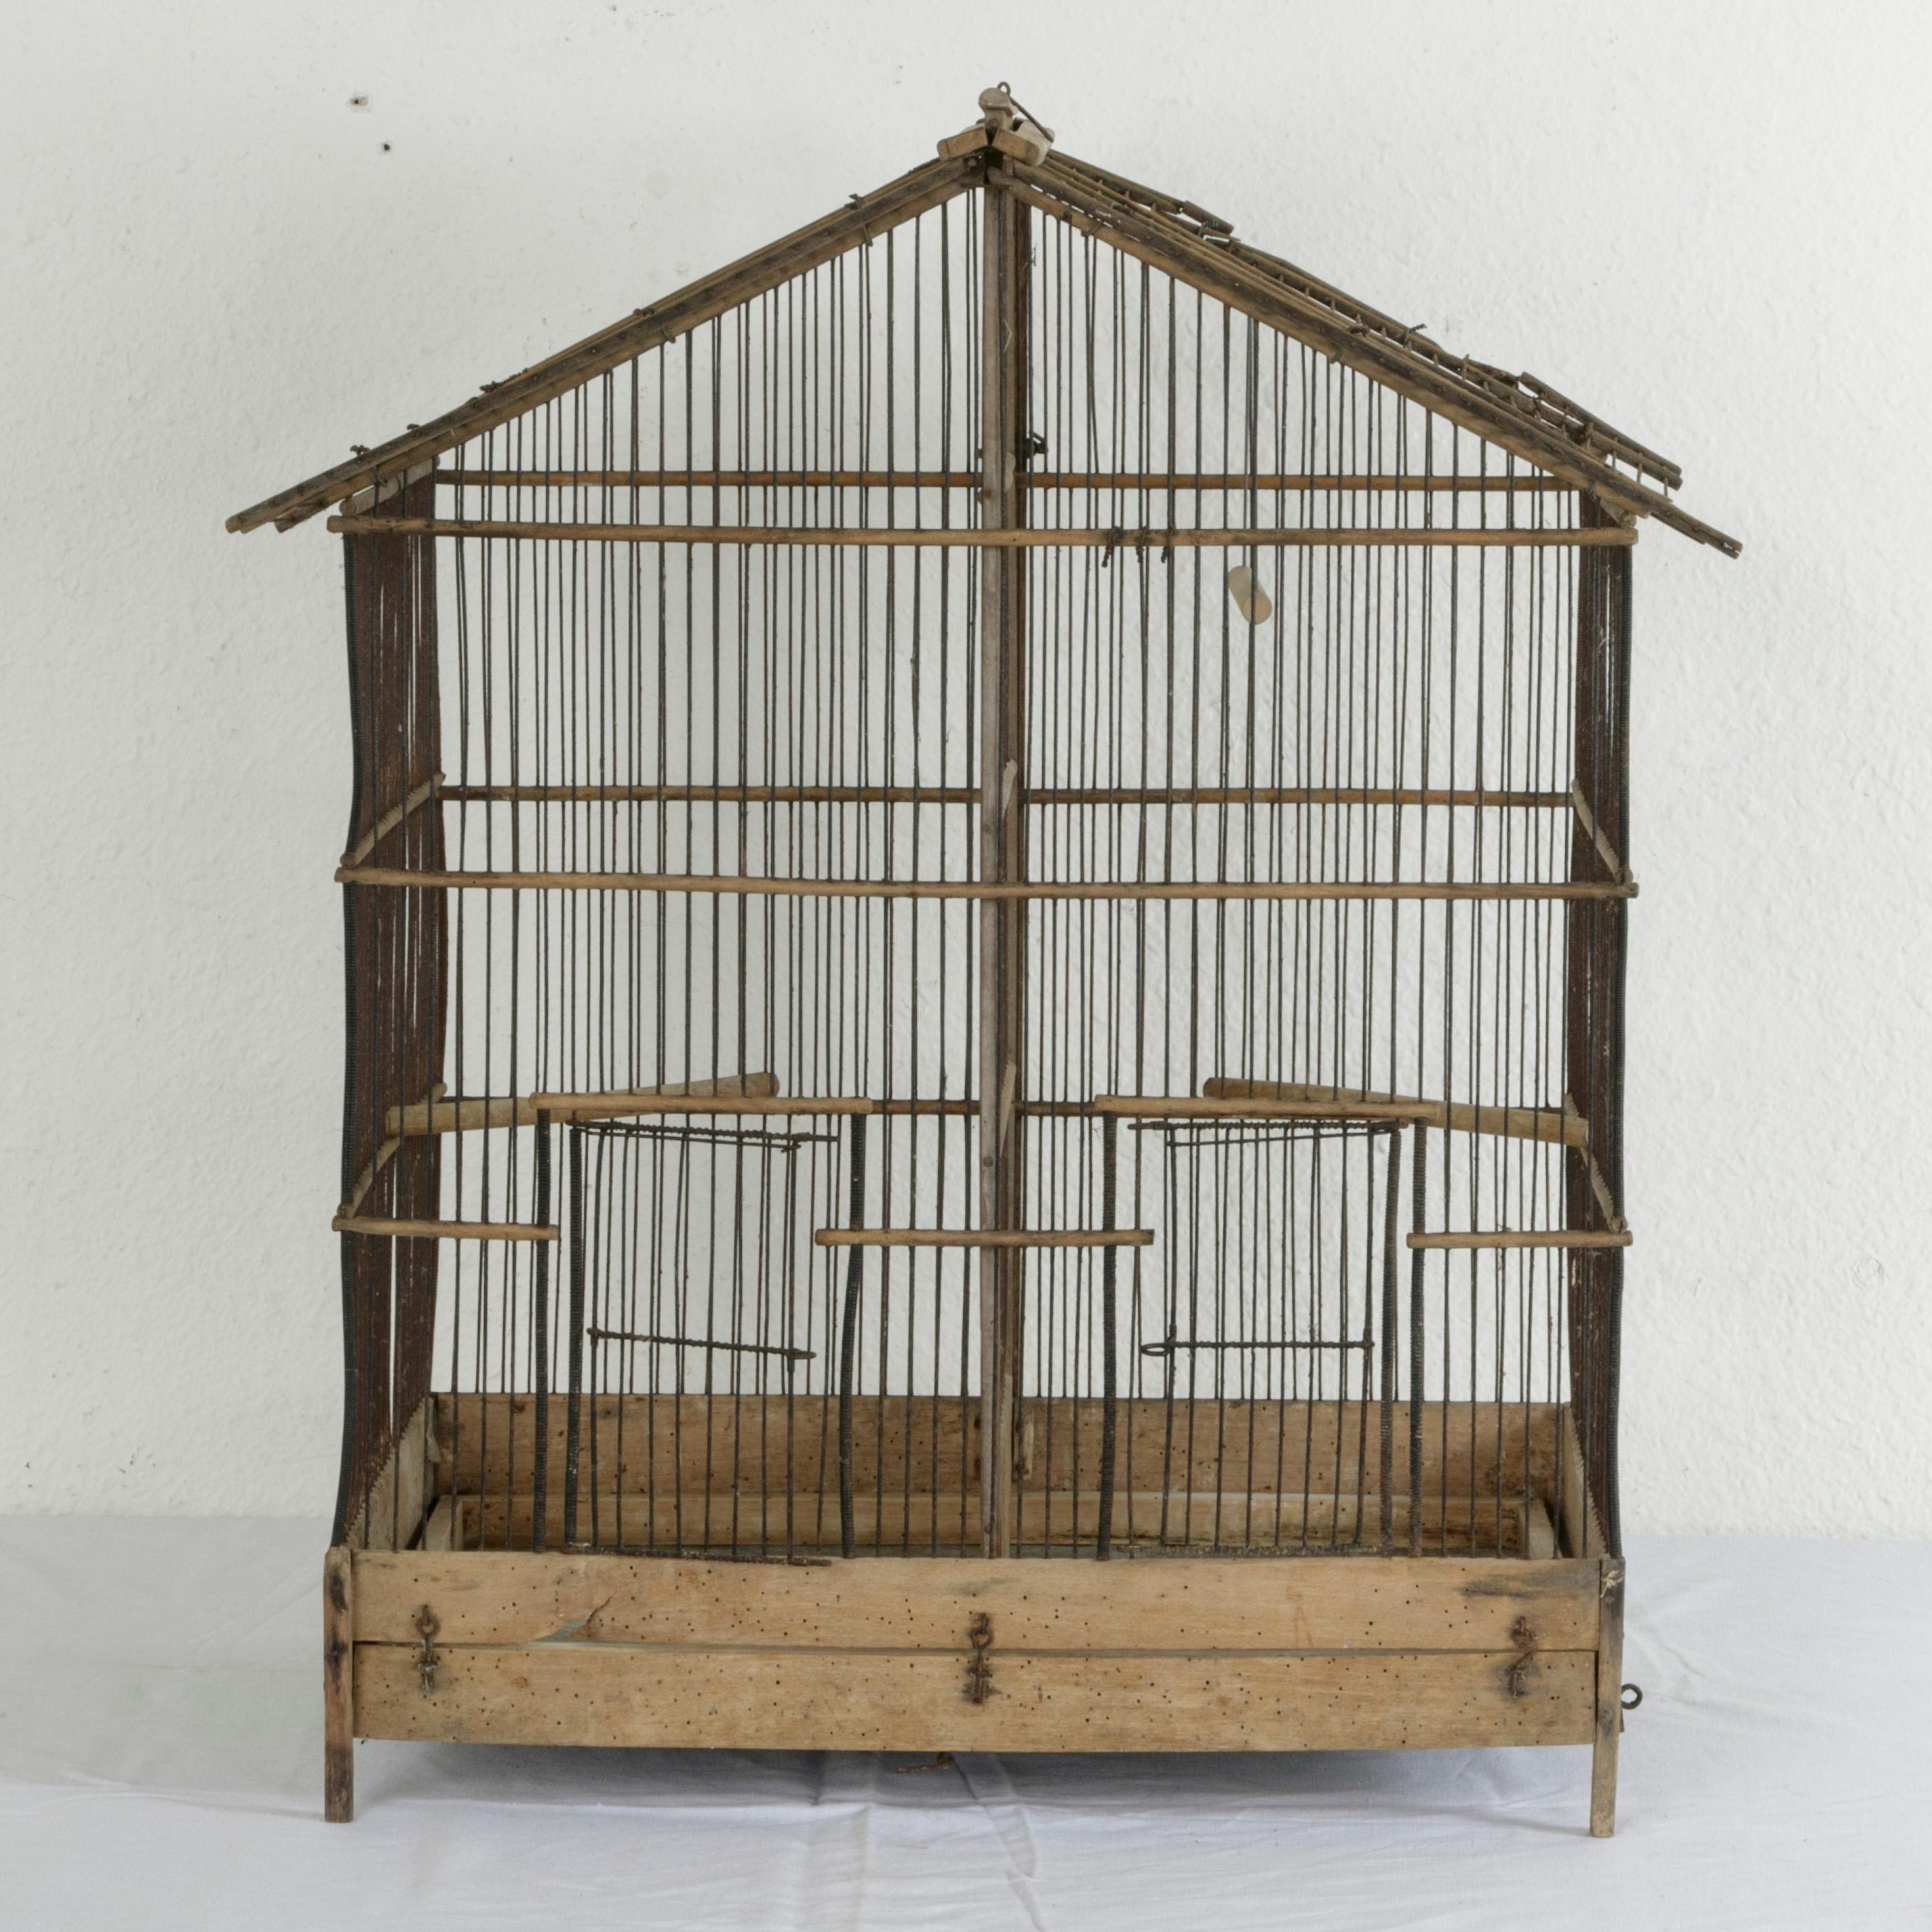 This artisan-made oak and wire bird cage takes the form of a gabled house and features a zinc bottom and three different perches. With two compartments that can be joined by removing the central wall, the cage has two hinged doors, one for each